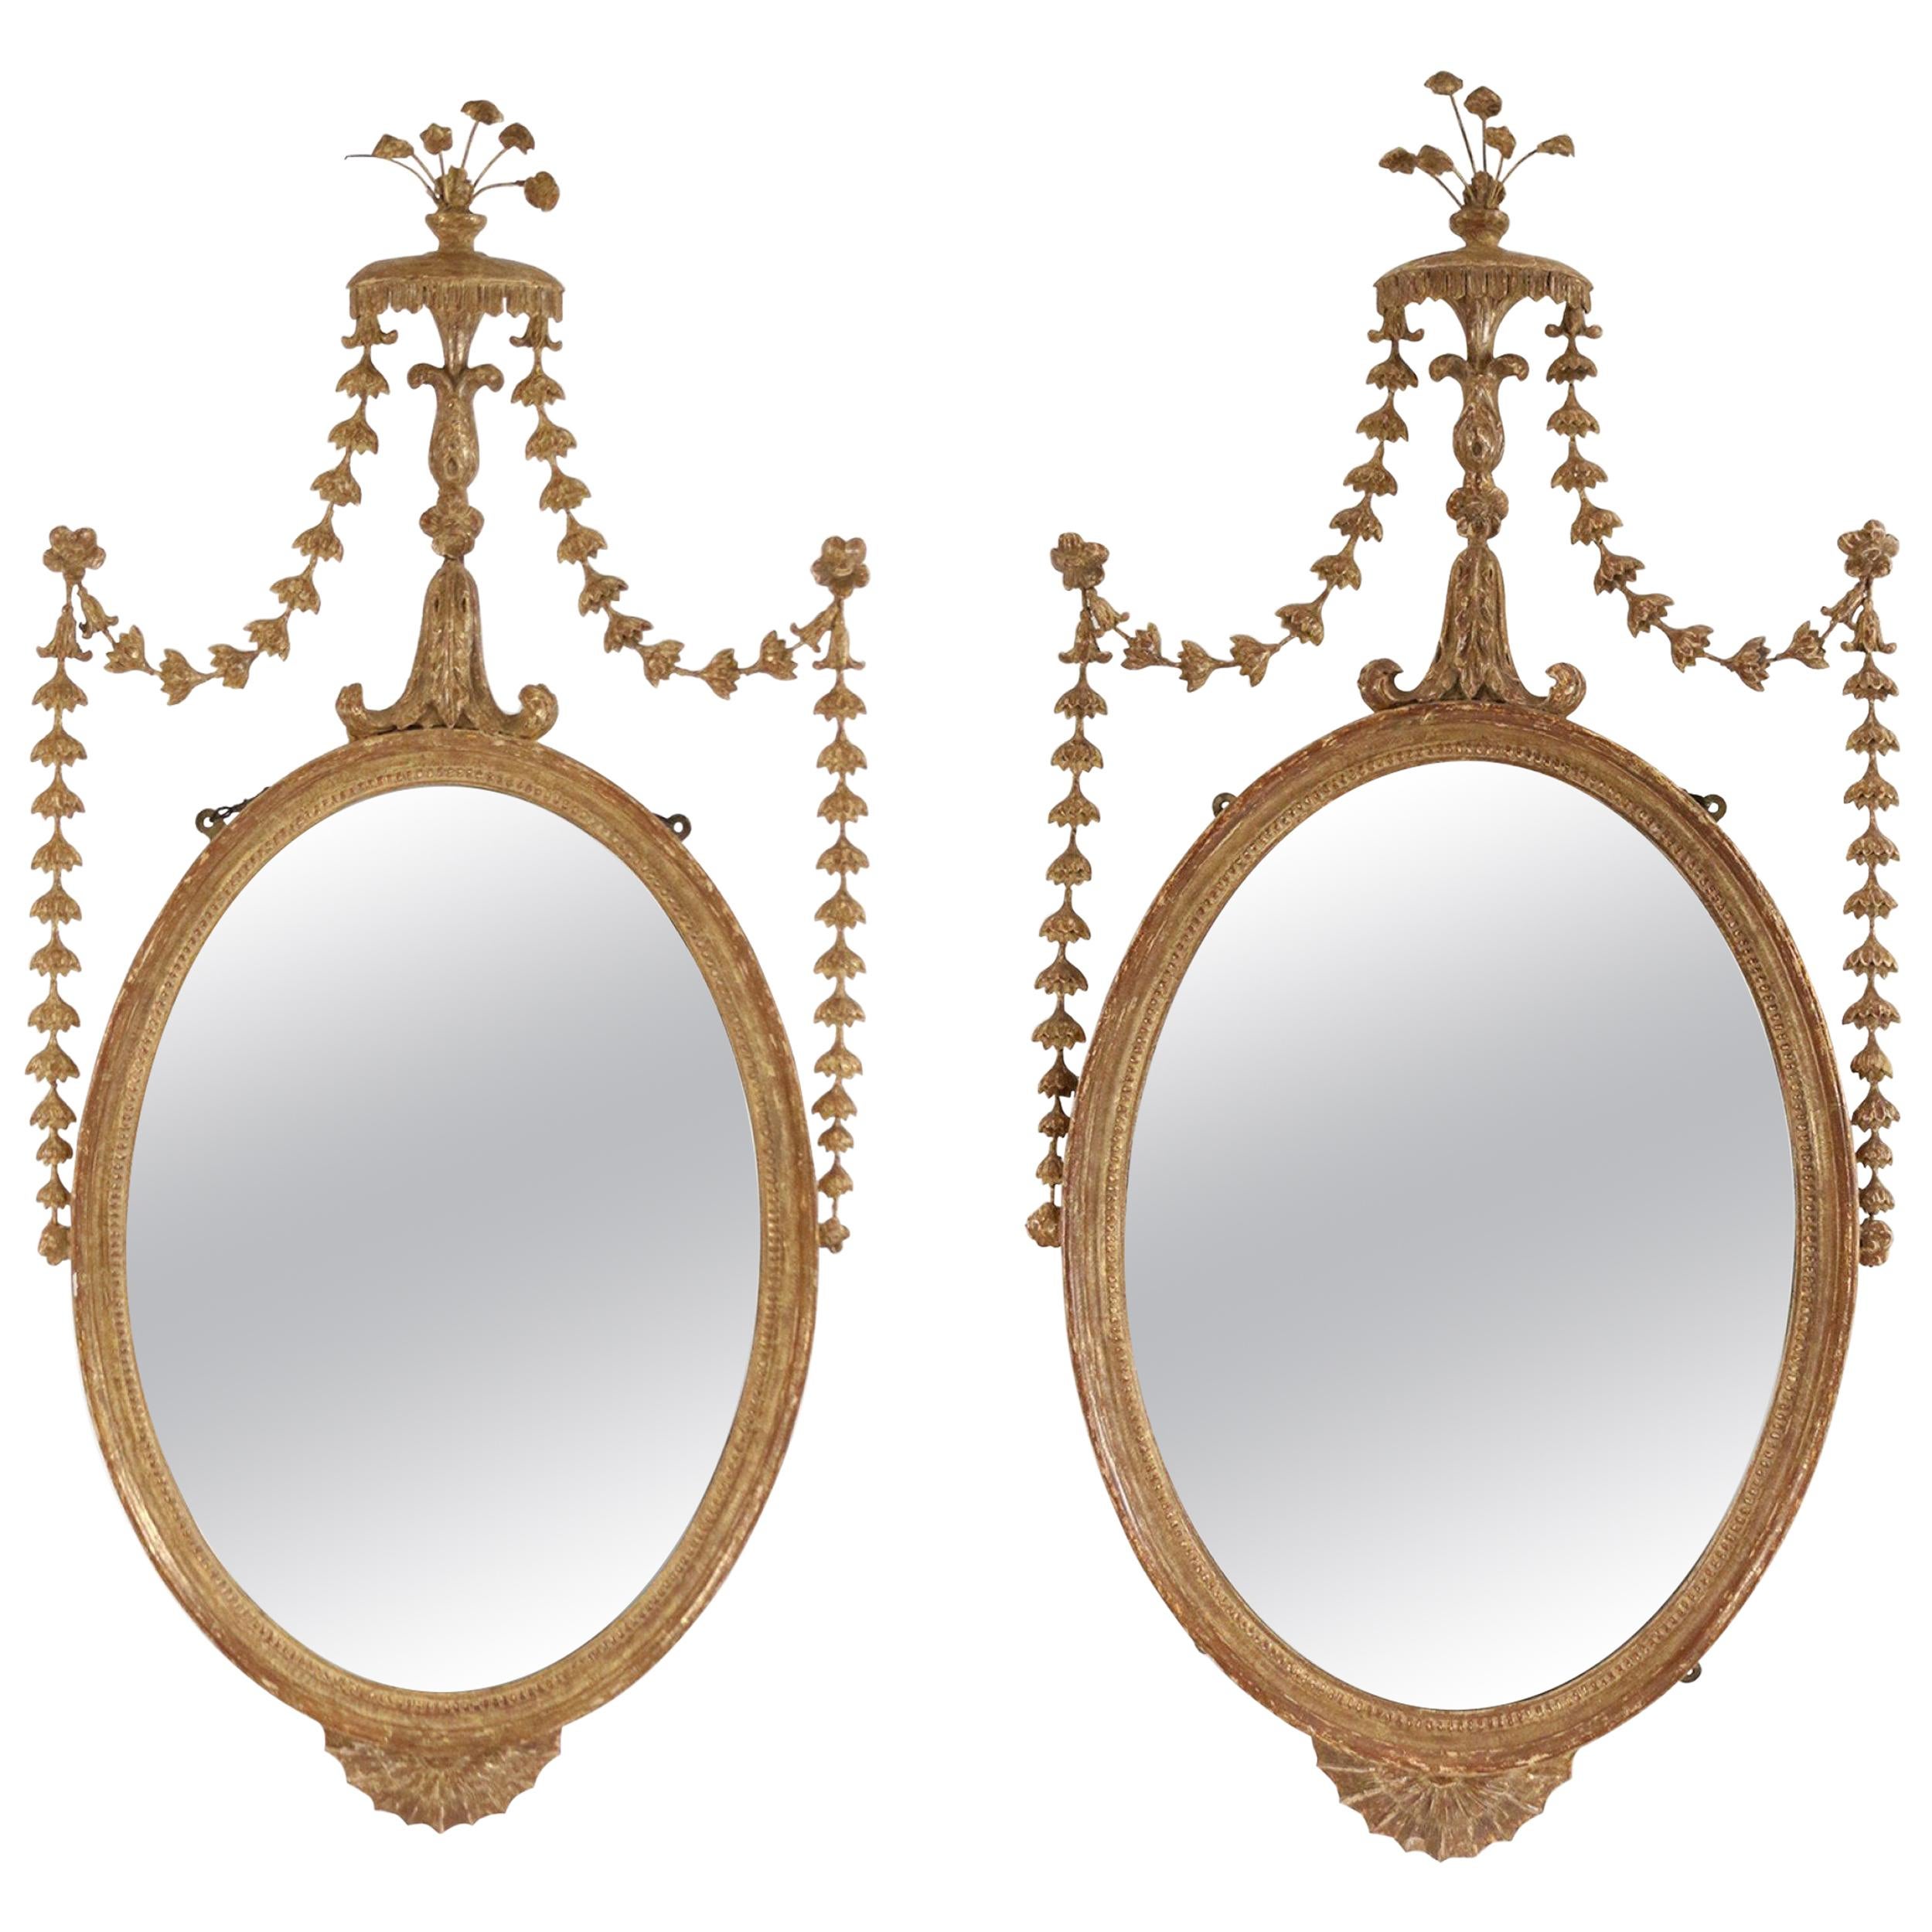 Pair of English Adam Style Oval Giltwood Wall Mirrors